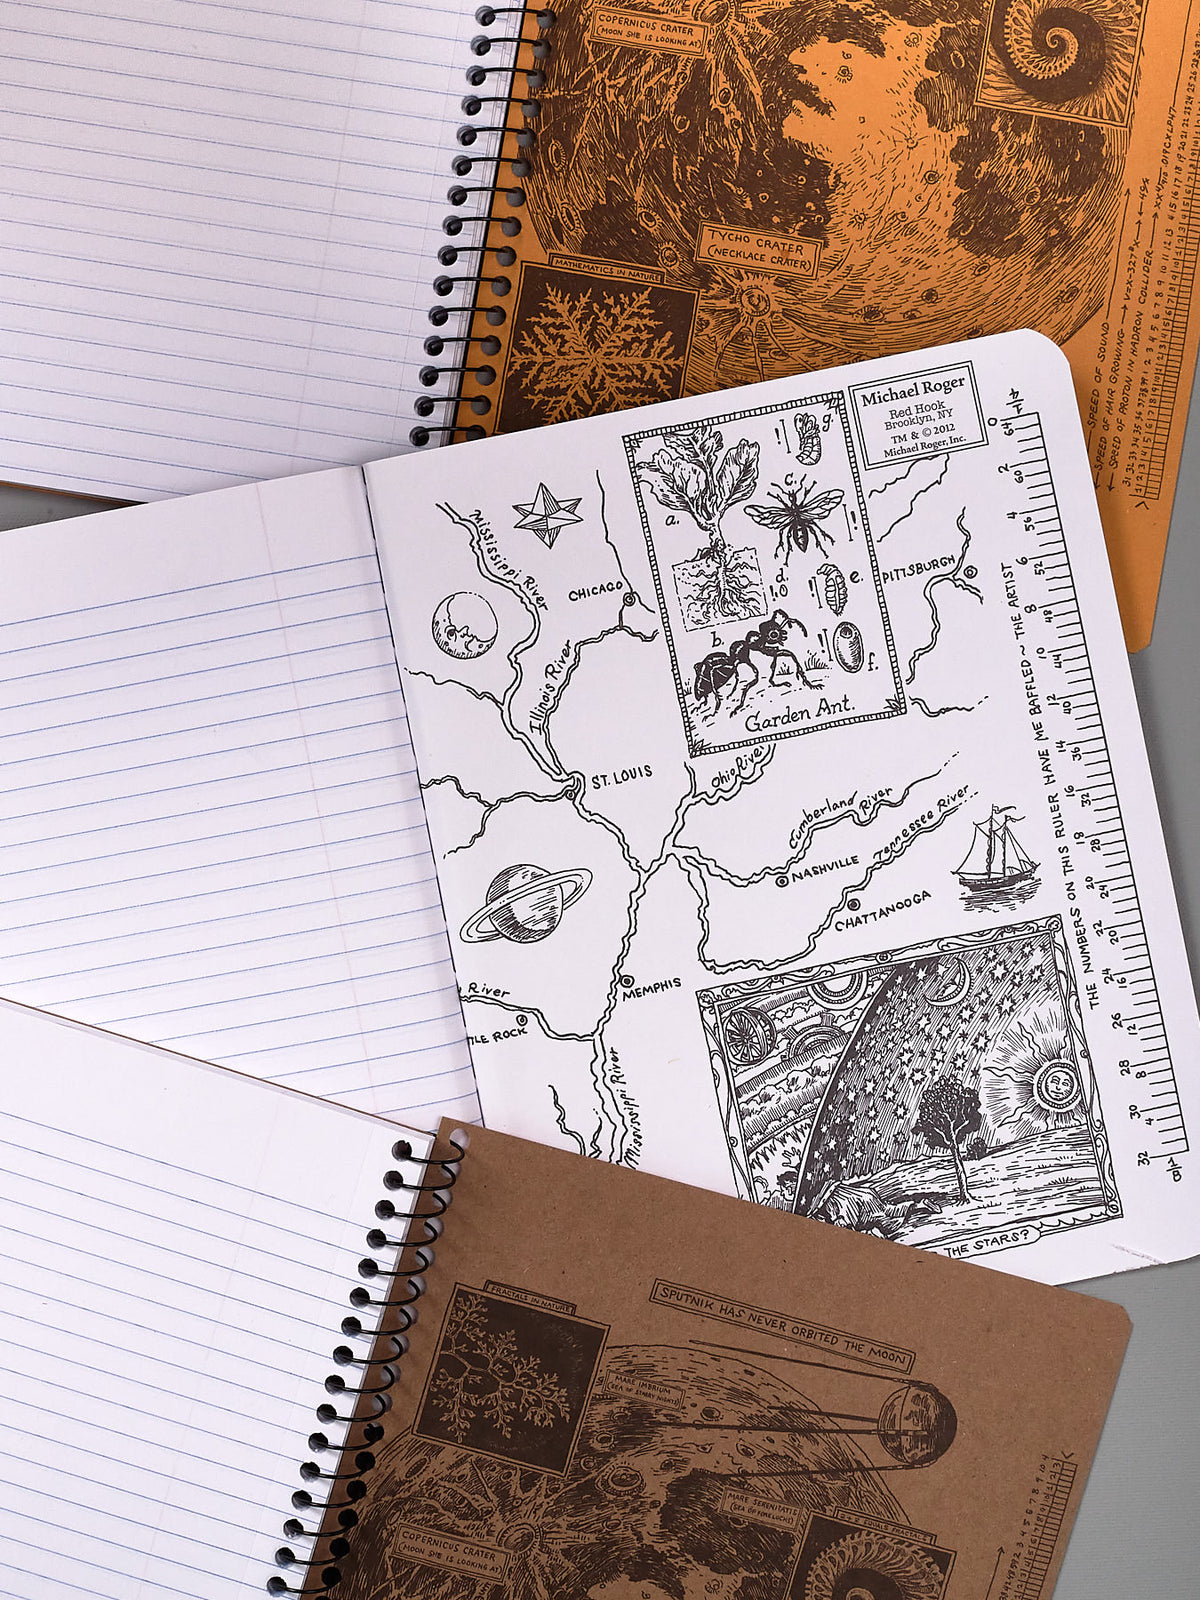 A Decomposition Recycled Notebook – Large/Ruled (Rainforest) with a map and drawings on it.